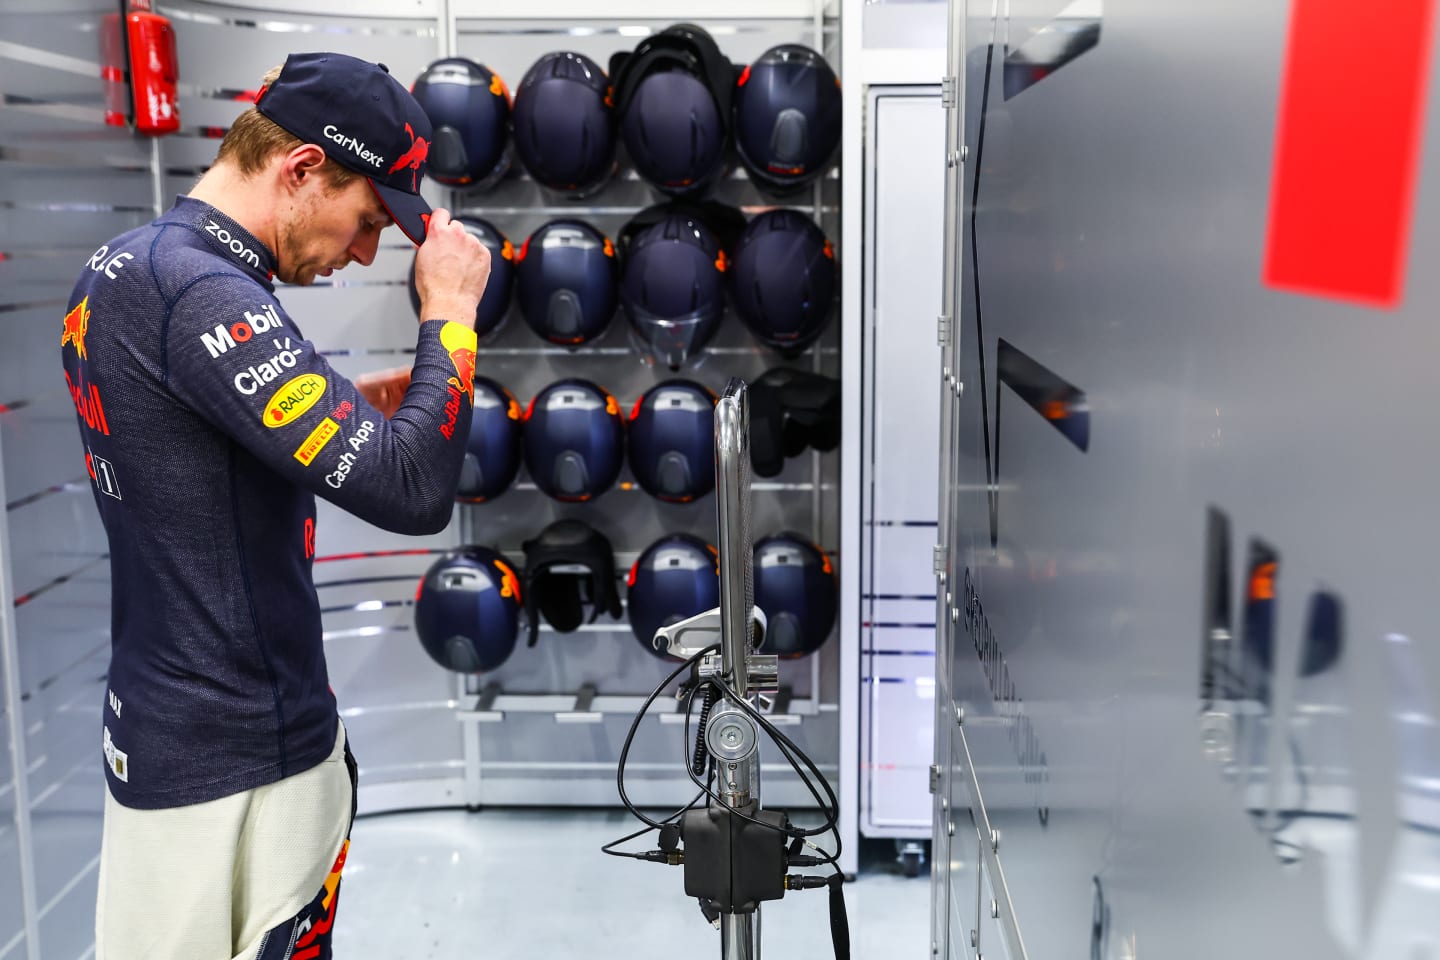 SAO PAULO, BRAZIL - NOVEMBER 11: Max Verstappen of the Netherlands and Oracle Red Bull Racing prepares to drive in the garage during qualifying ahead of the F1 Grand Prix of Brazil at Autodromo Jose Carlos Pace on November 11, 2022 in Sao Paulo, Brazil. (Photo by Mark Thompson/Getty Images)